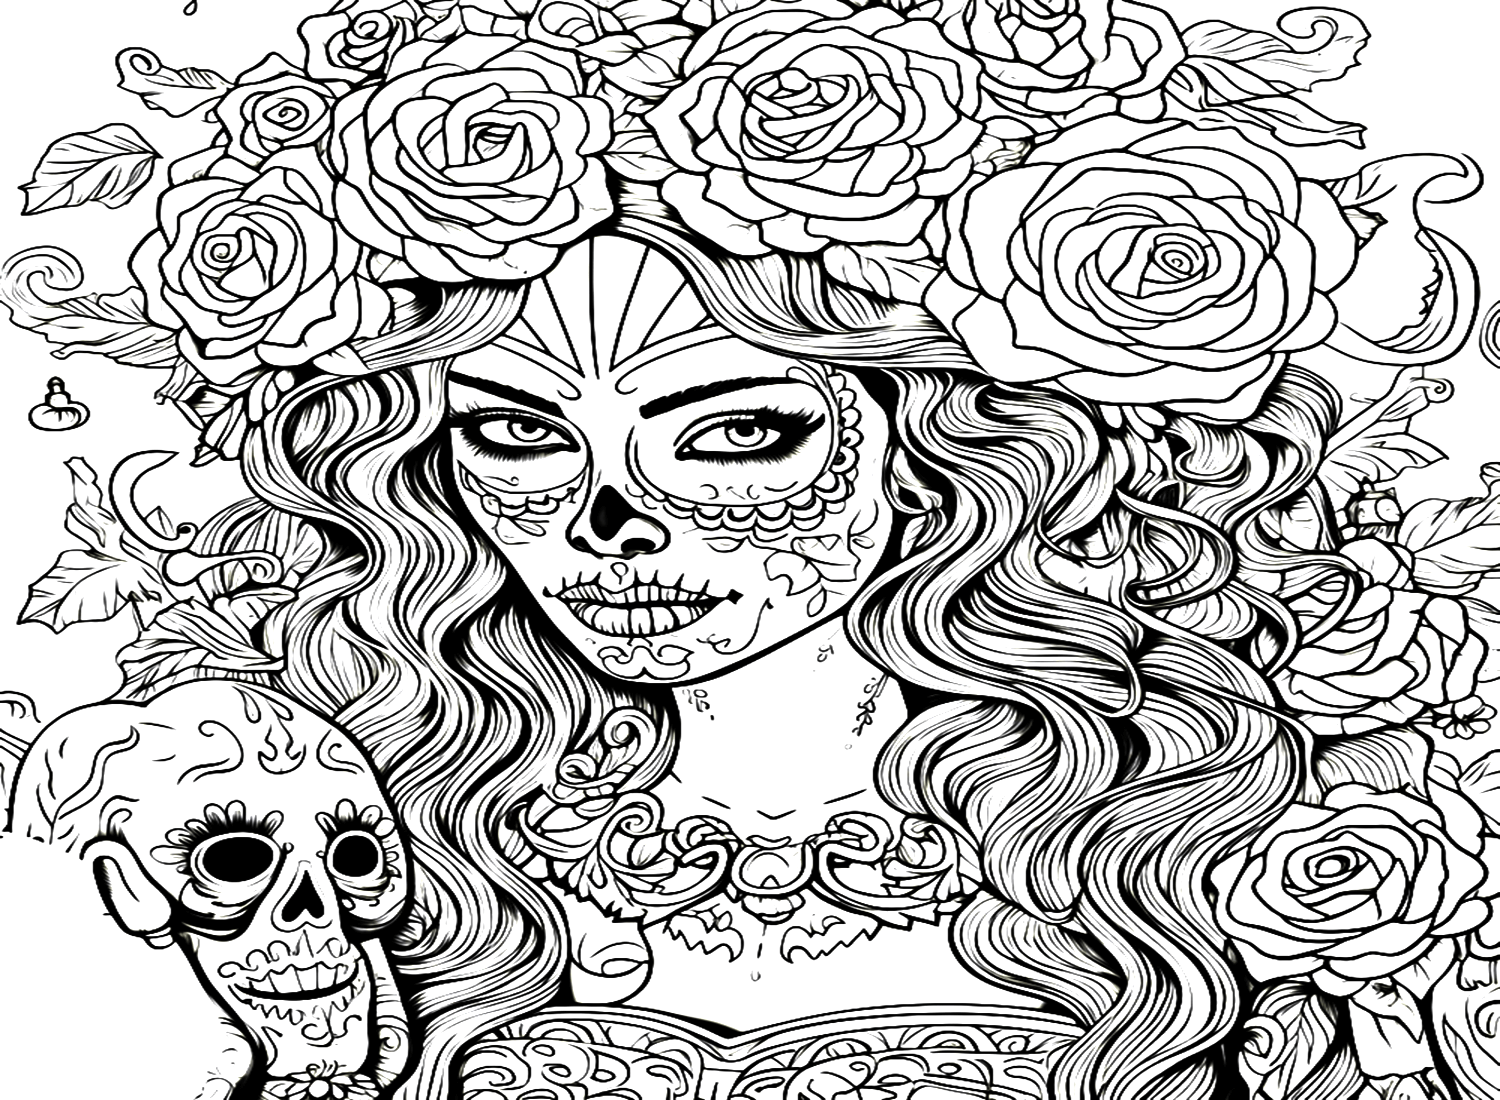 Halloween Mask Coloring Page For Adults